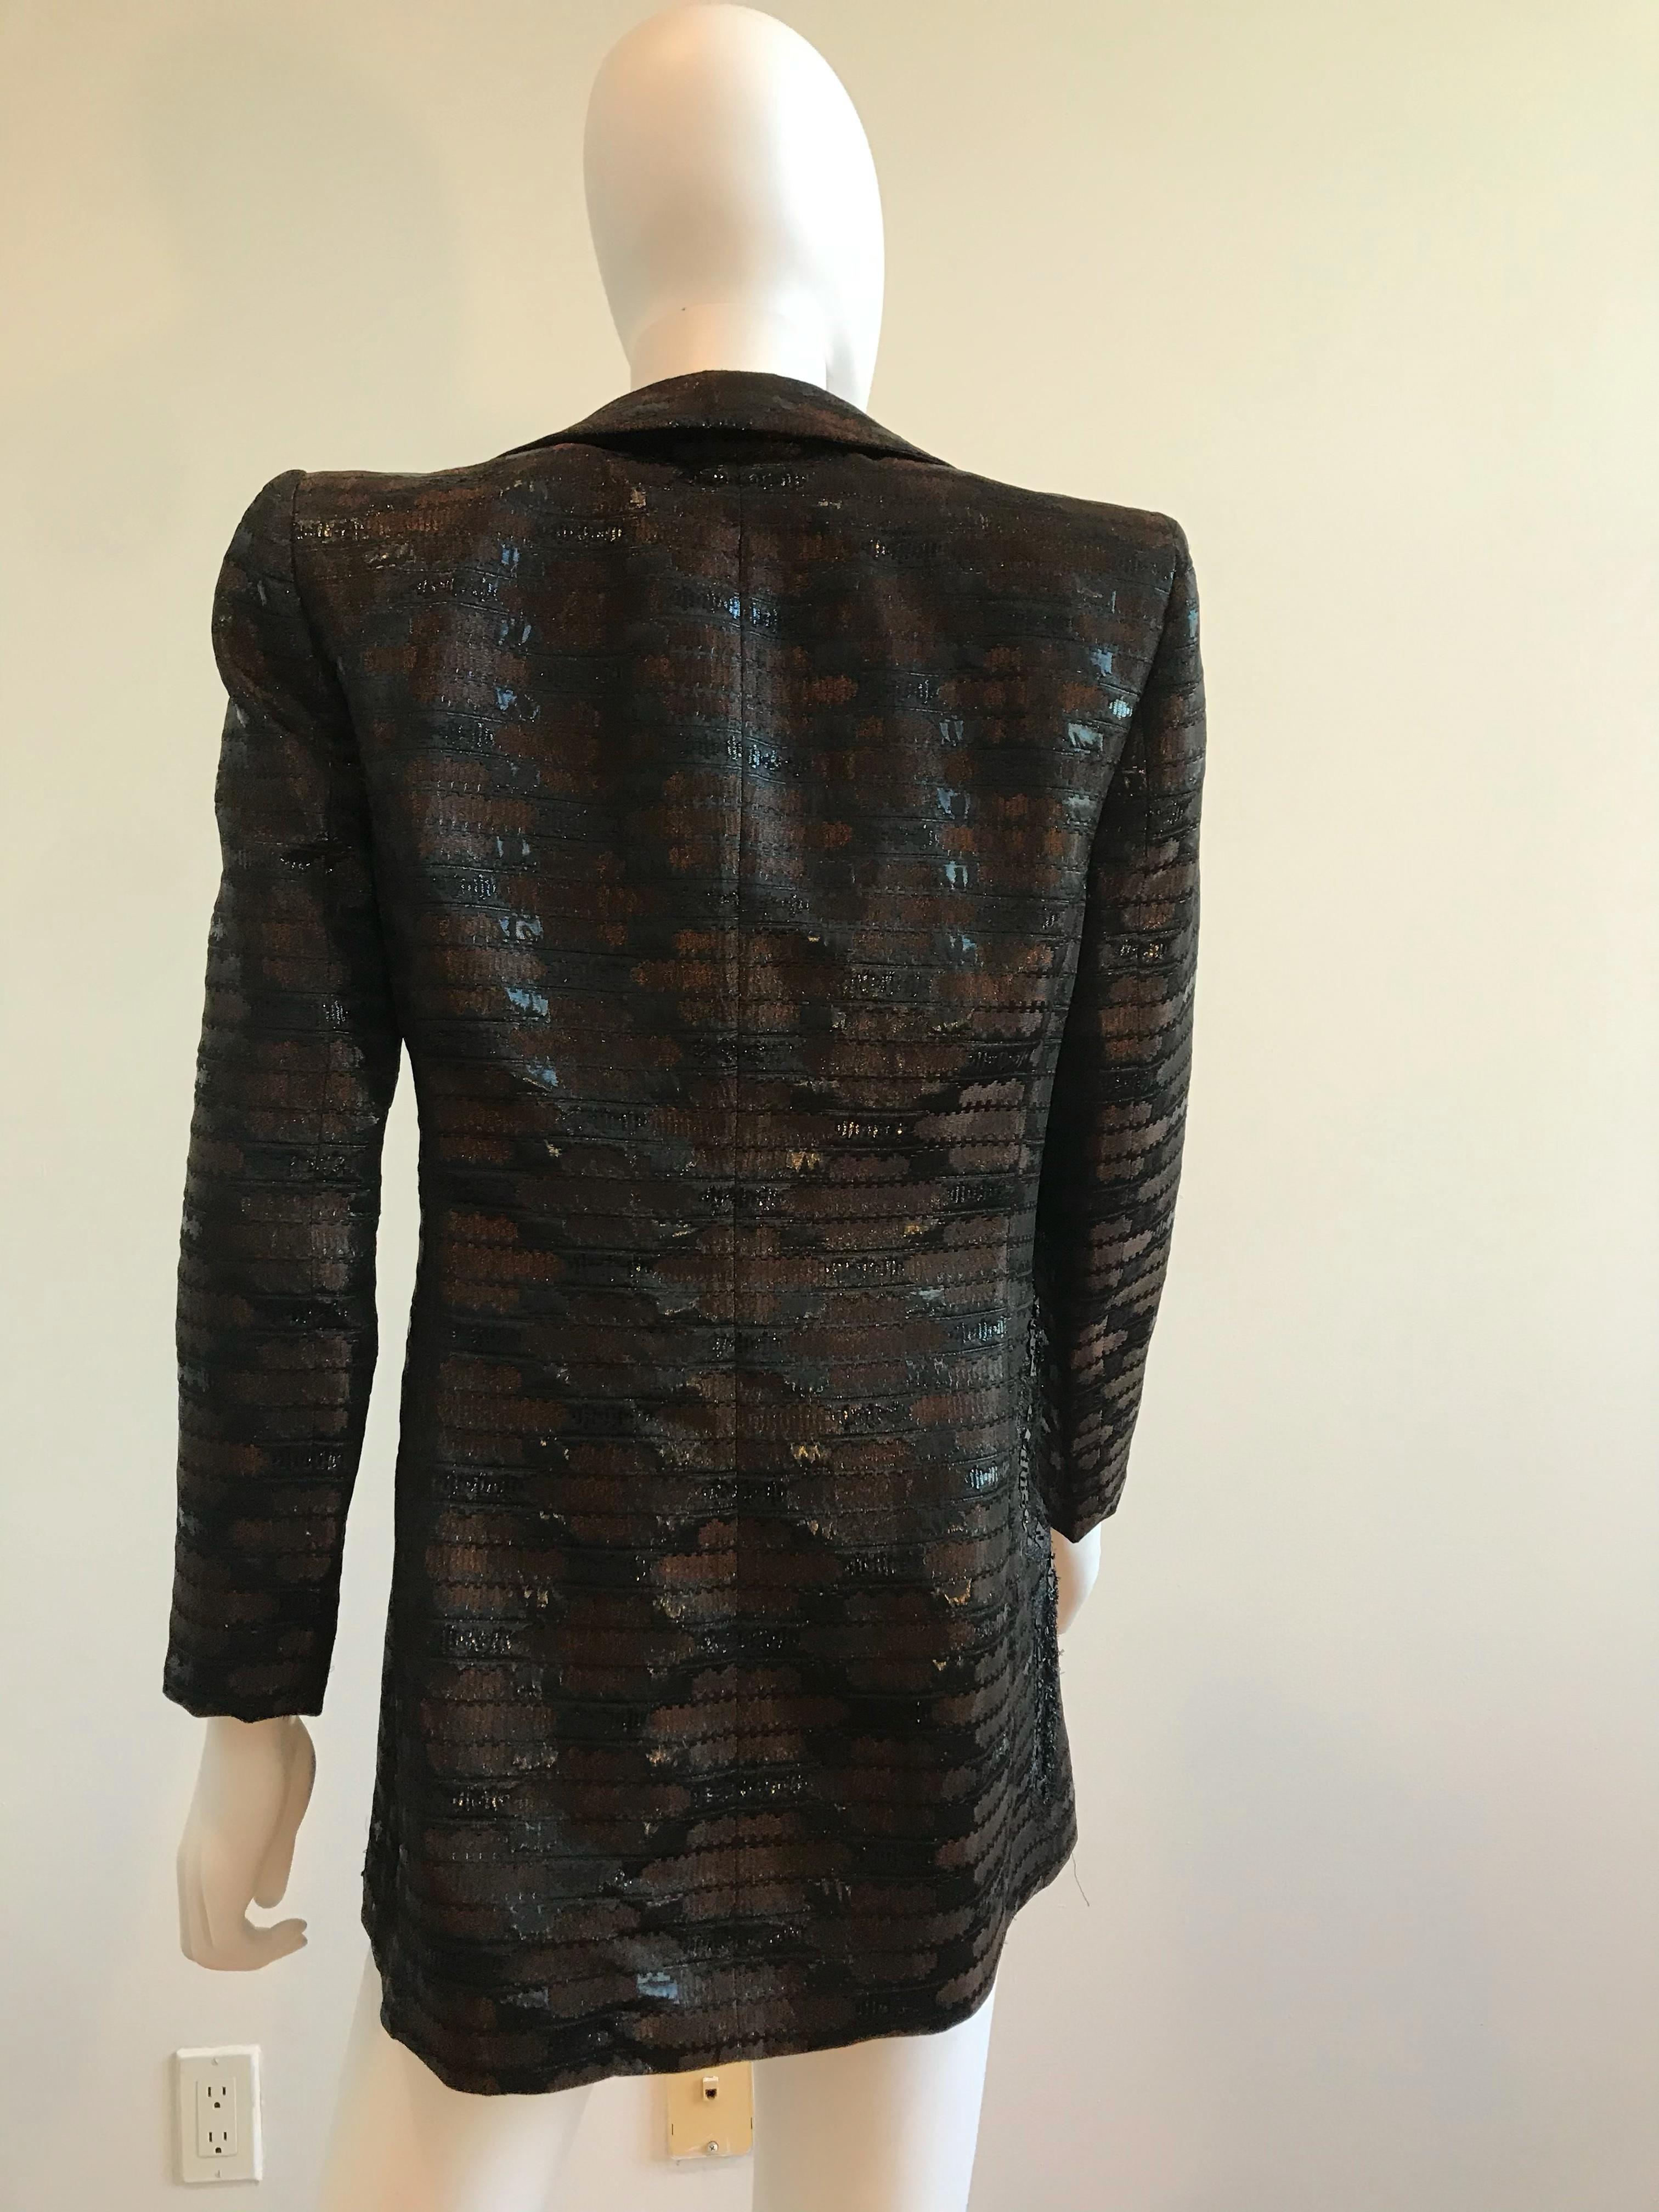 Gianfranco Ferre Floral Cutout Evening Blazer
Made In Italy
Size 40
Beaded side cutout
Button enclosure
Purchasing this item continues its narrative and reduces the environmental impact of using new resources. You can be confident that you’re making